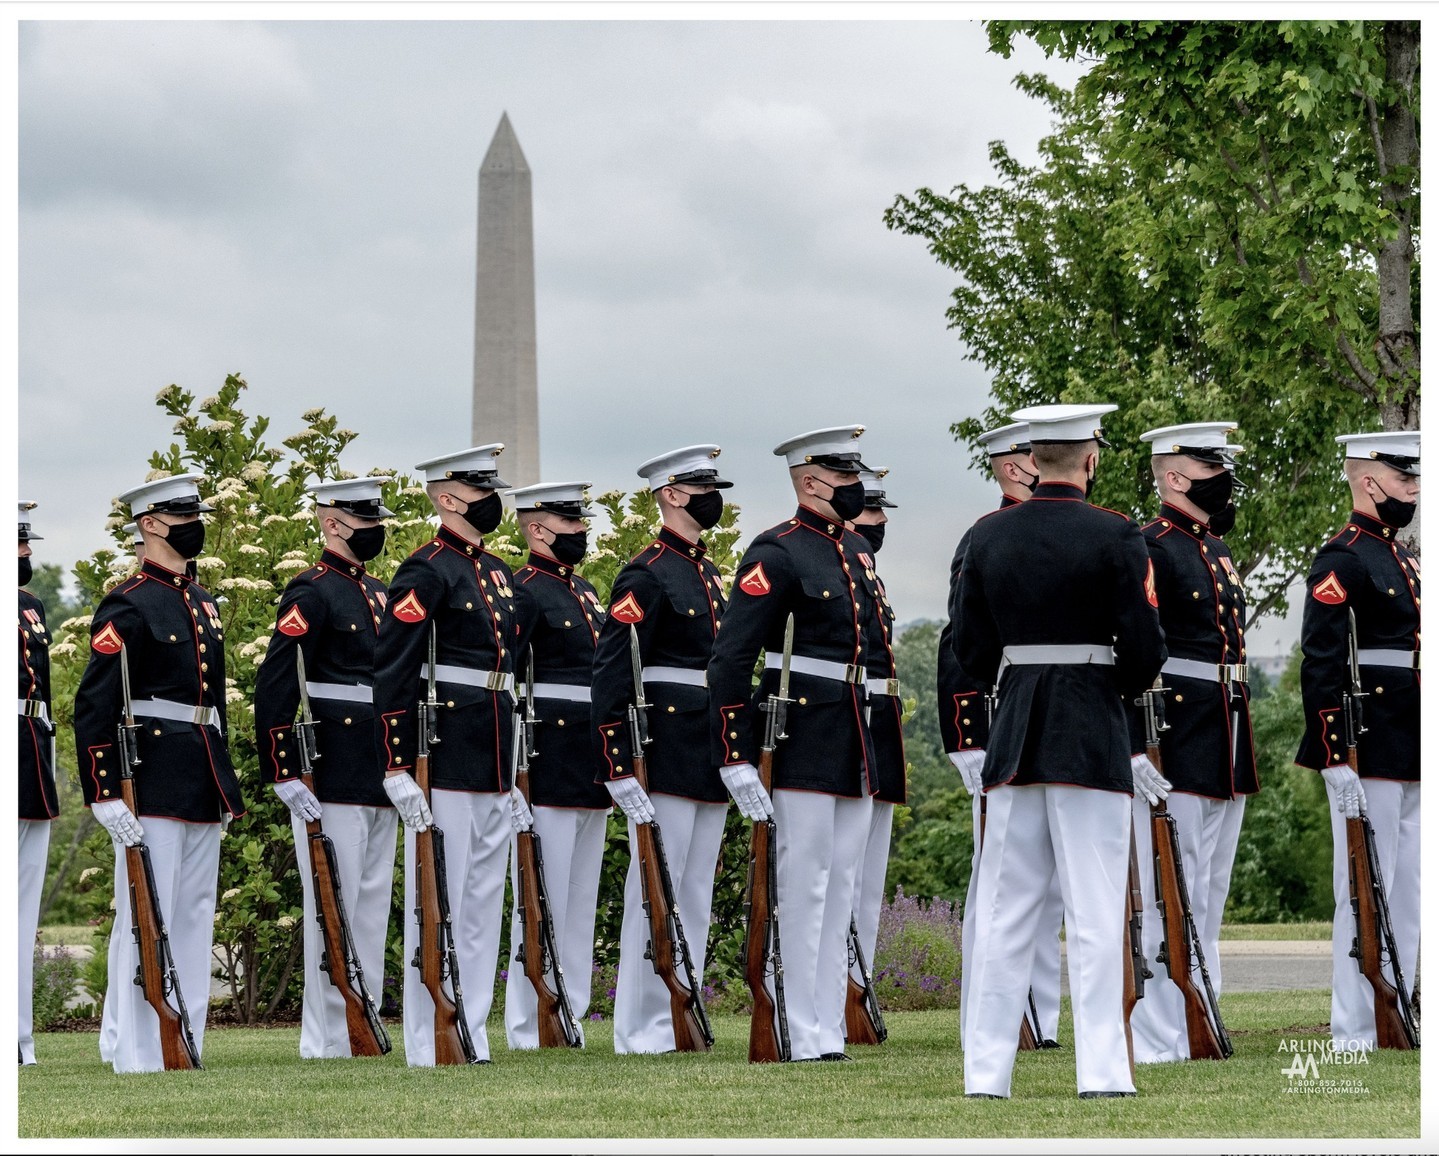 US Marines from @marinebarrackswashington march on during a service near McClellan Circle in Arlington National Cemetery. 

This area of the cemetery has wonderful views of the Washington Monument, Air Force Memorial, Arlington House, and at certain times of day, even the National Cathedral casts its majestic gaze on these hallowed grounds.